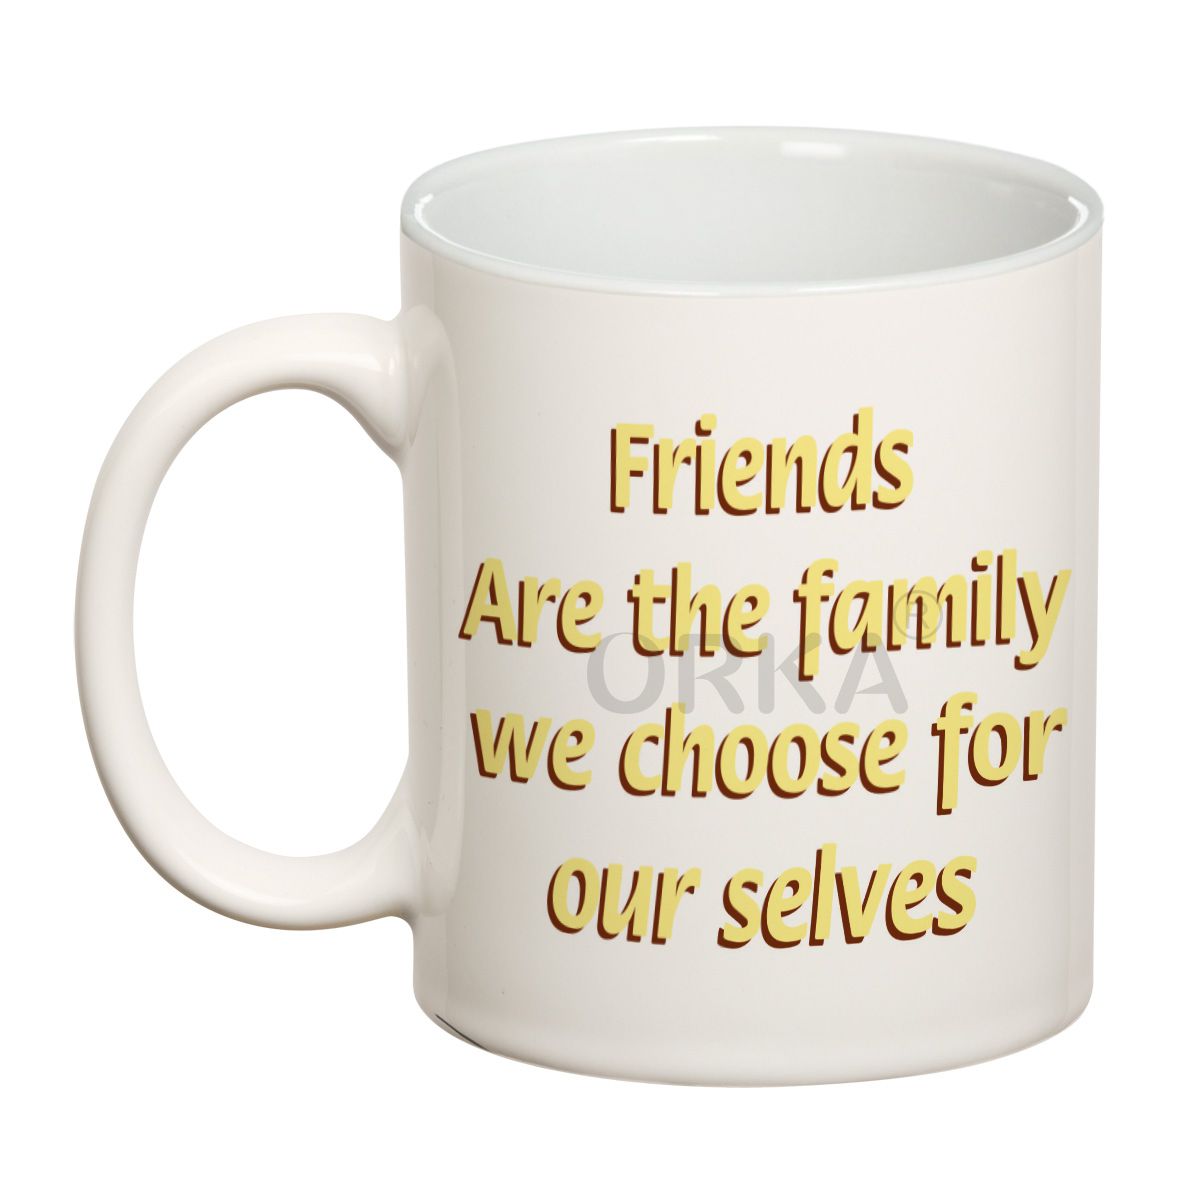 ORKA Coffee Mug Quotes Printed( Friends Are Family ) Theme 11 Oz   